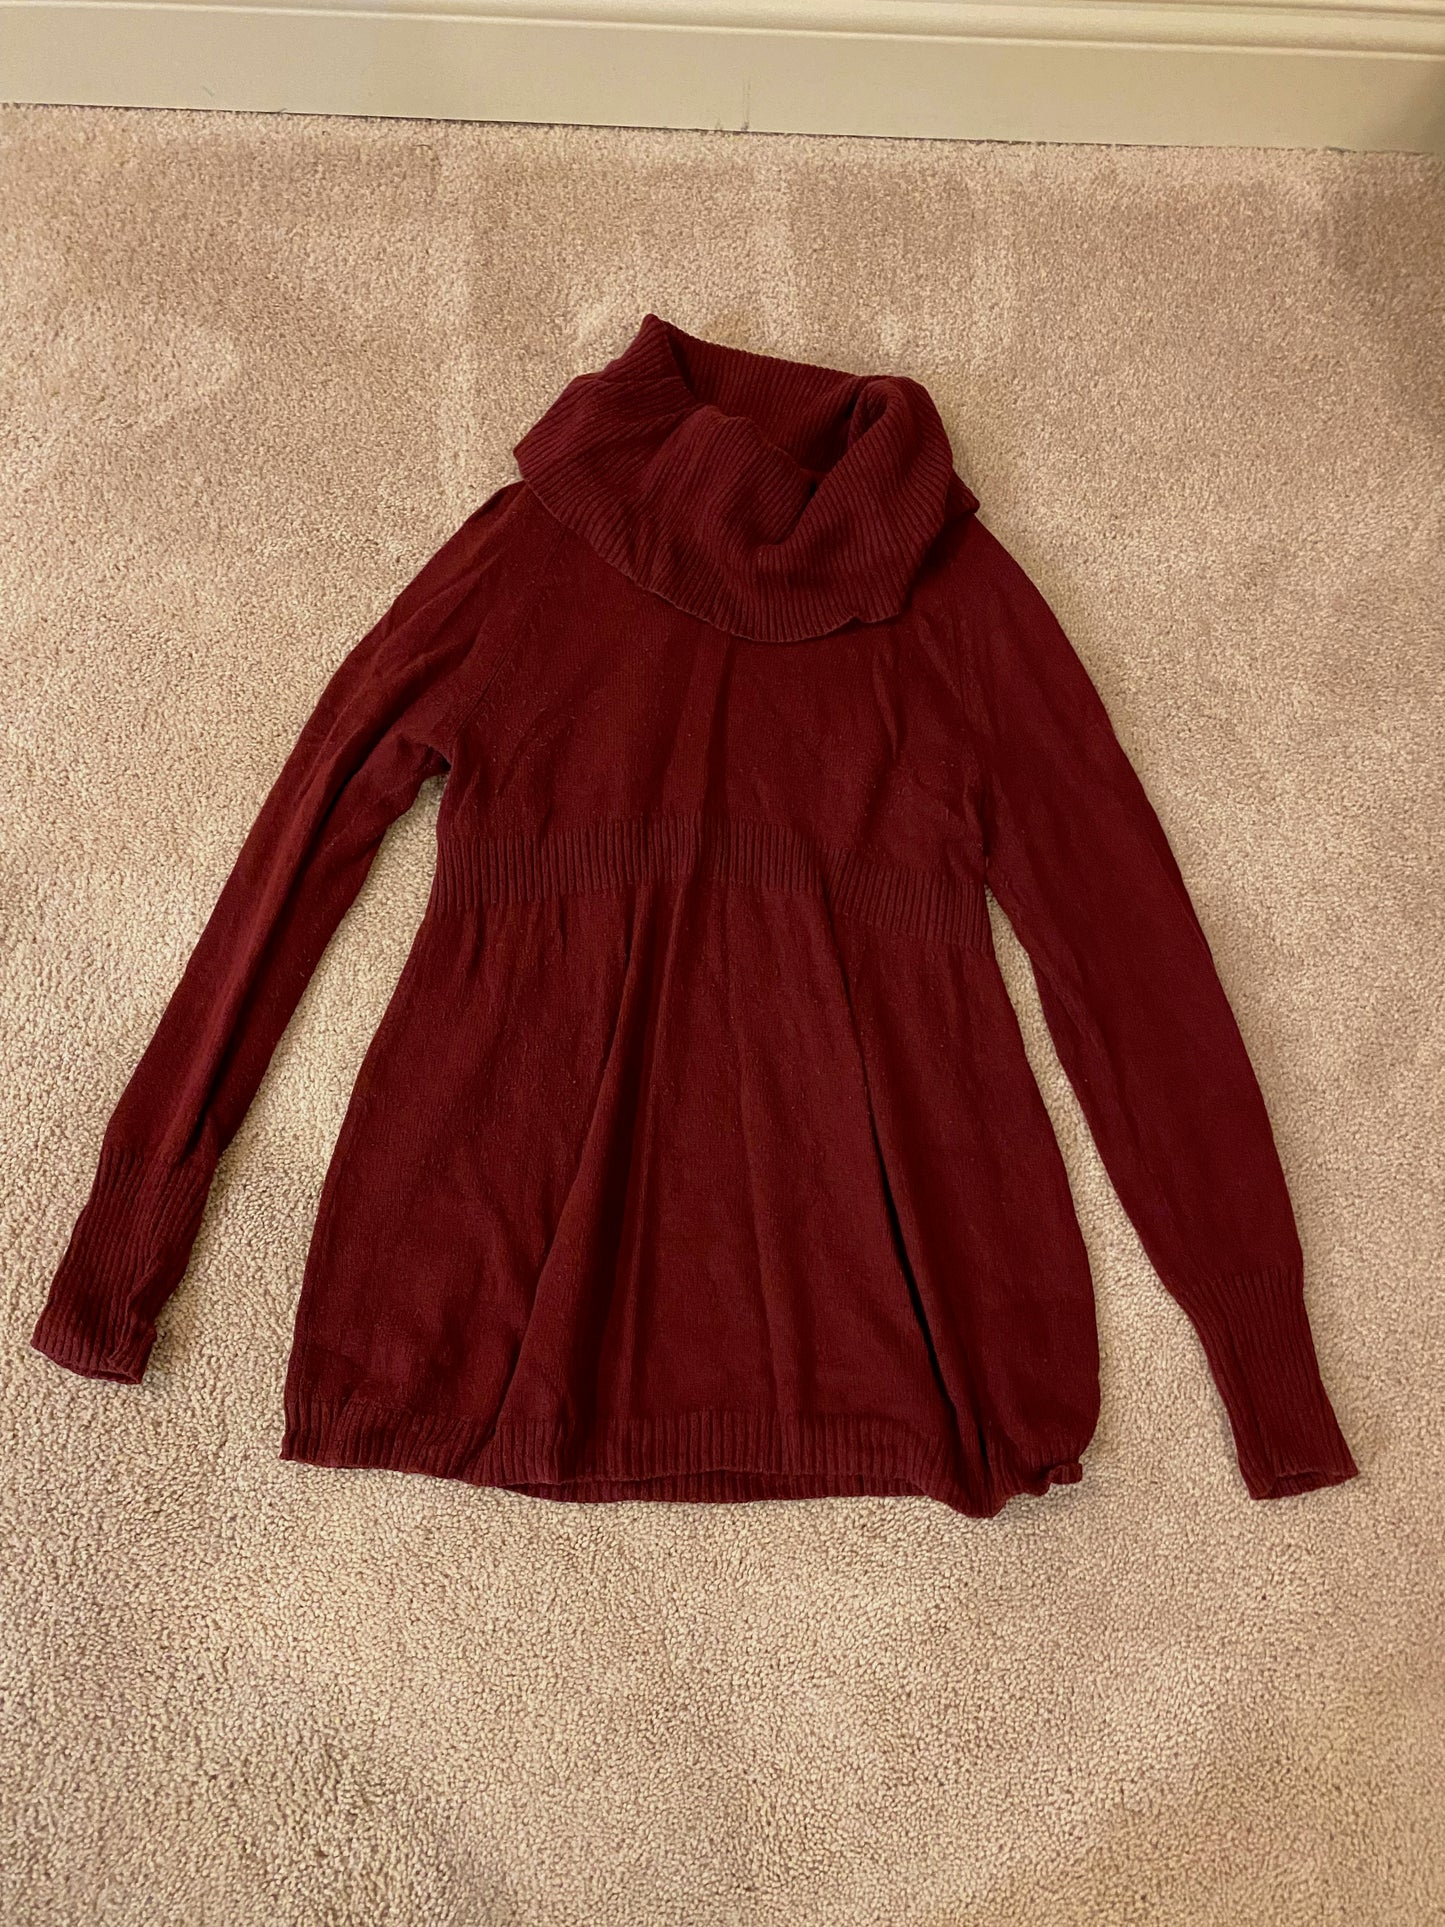 Old Navy Maroon Maternity Top-Size L